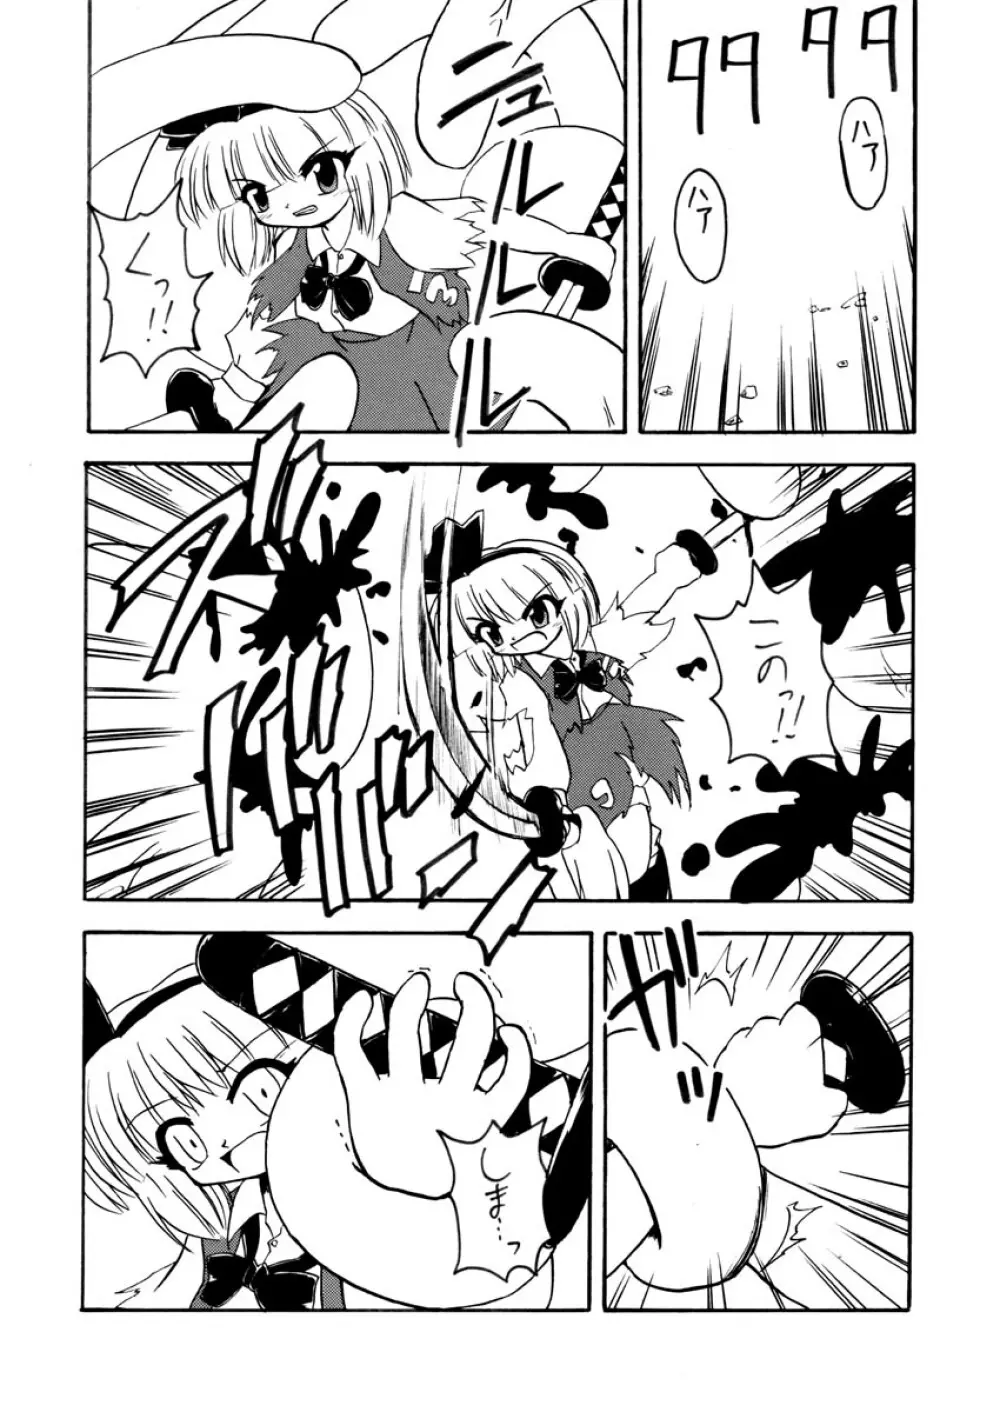 Touhou Tentacles {Touhou Project} - page2